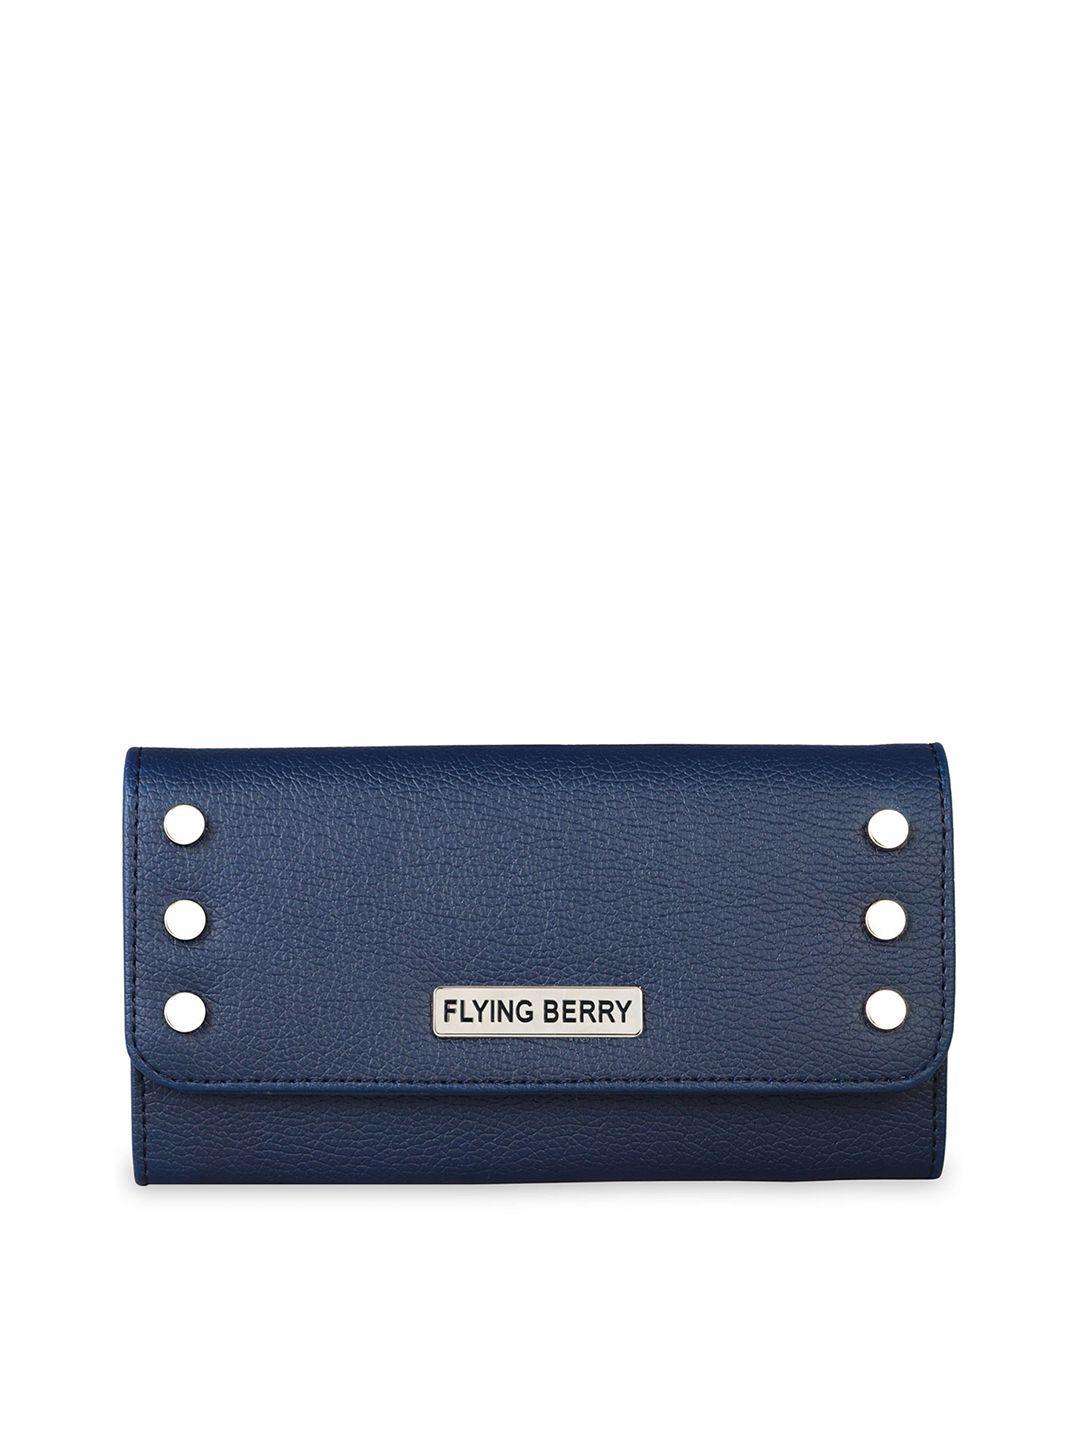 flying berry womens blue clutch